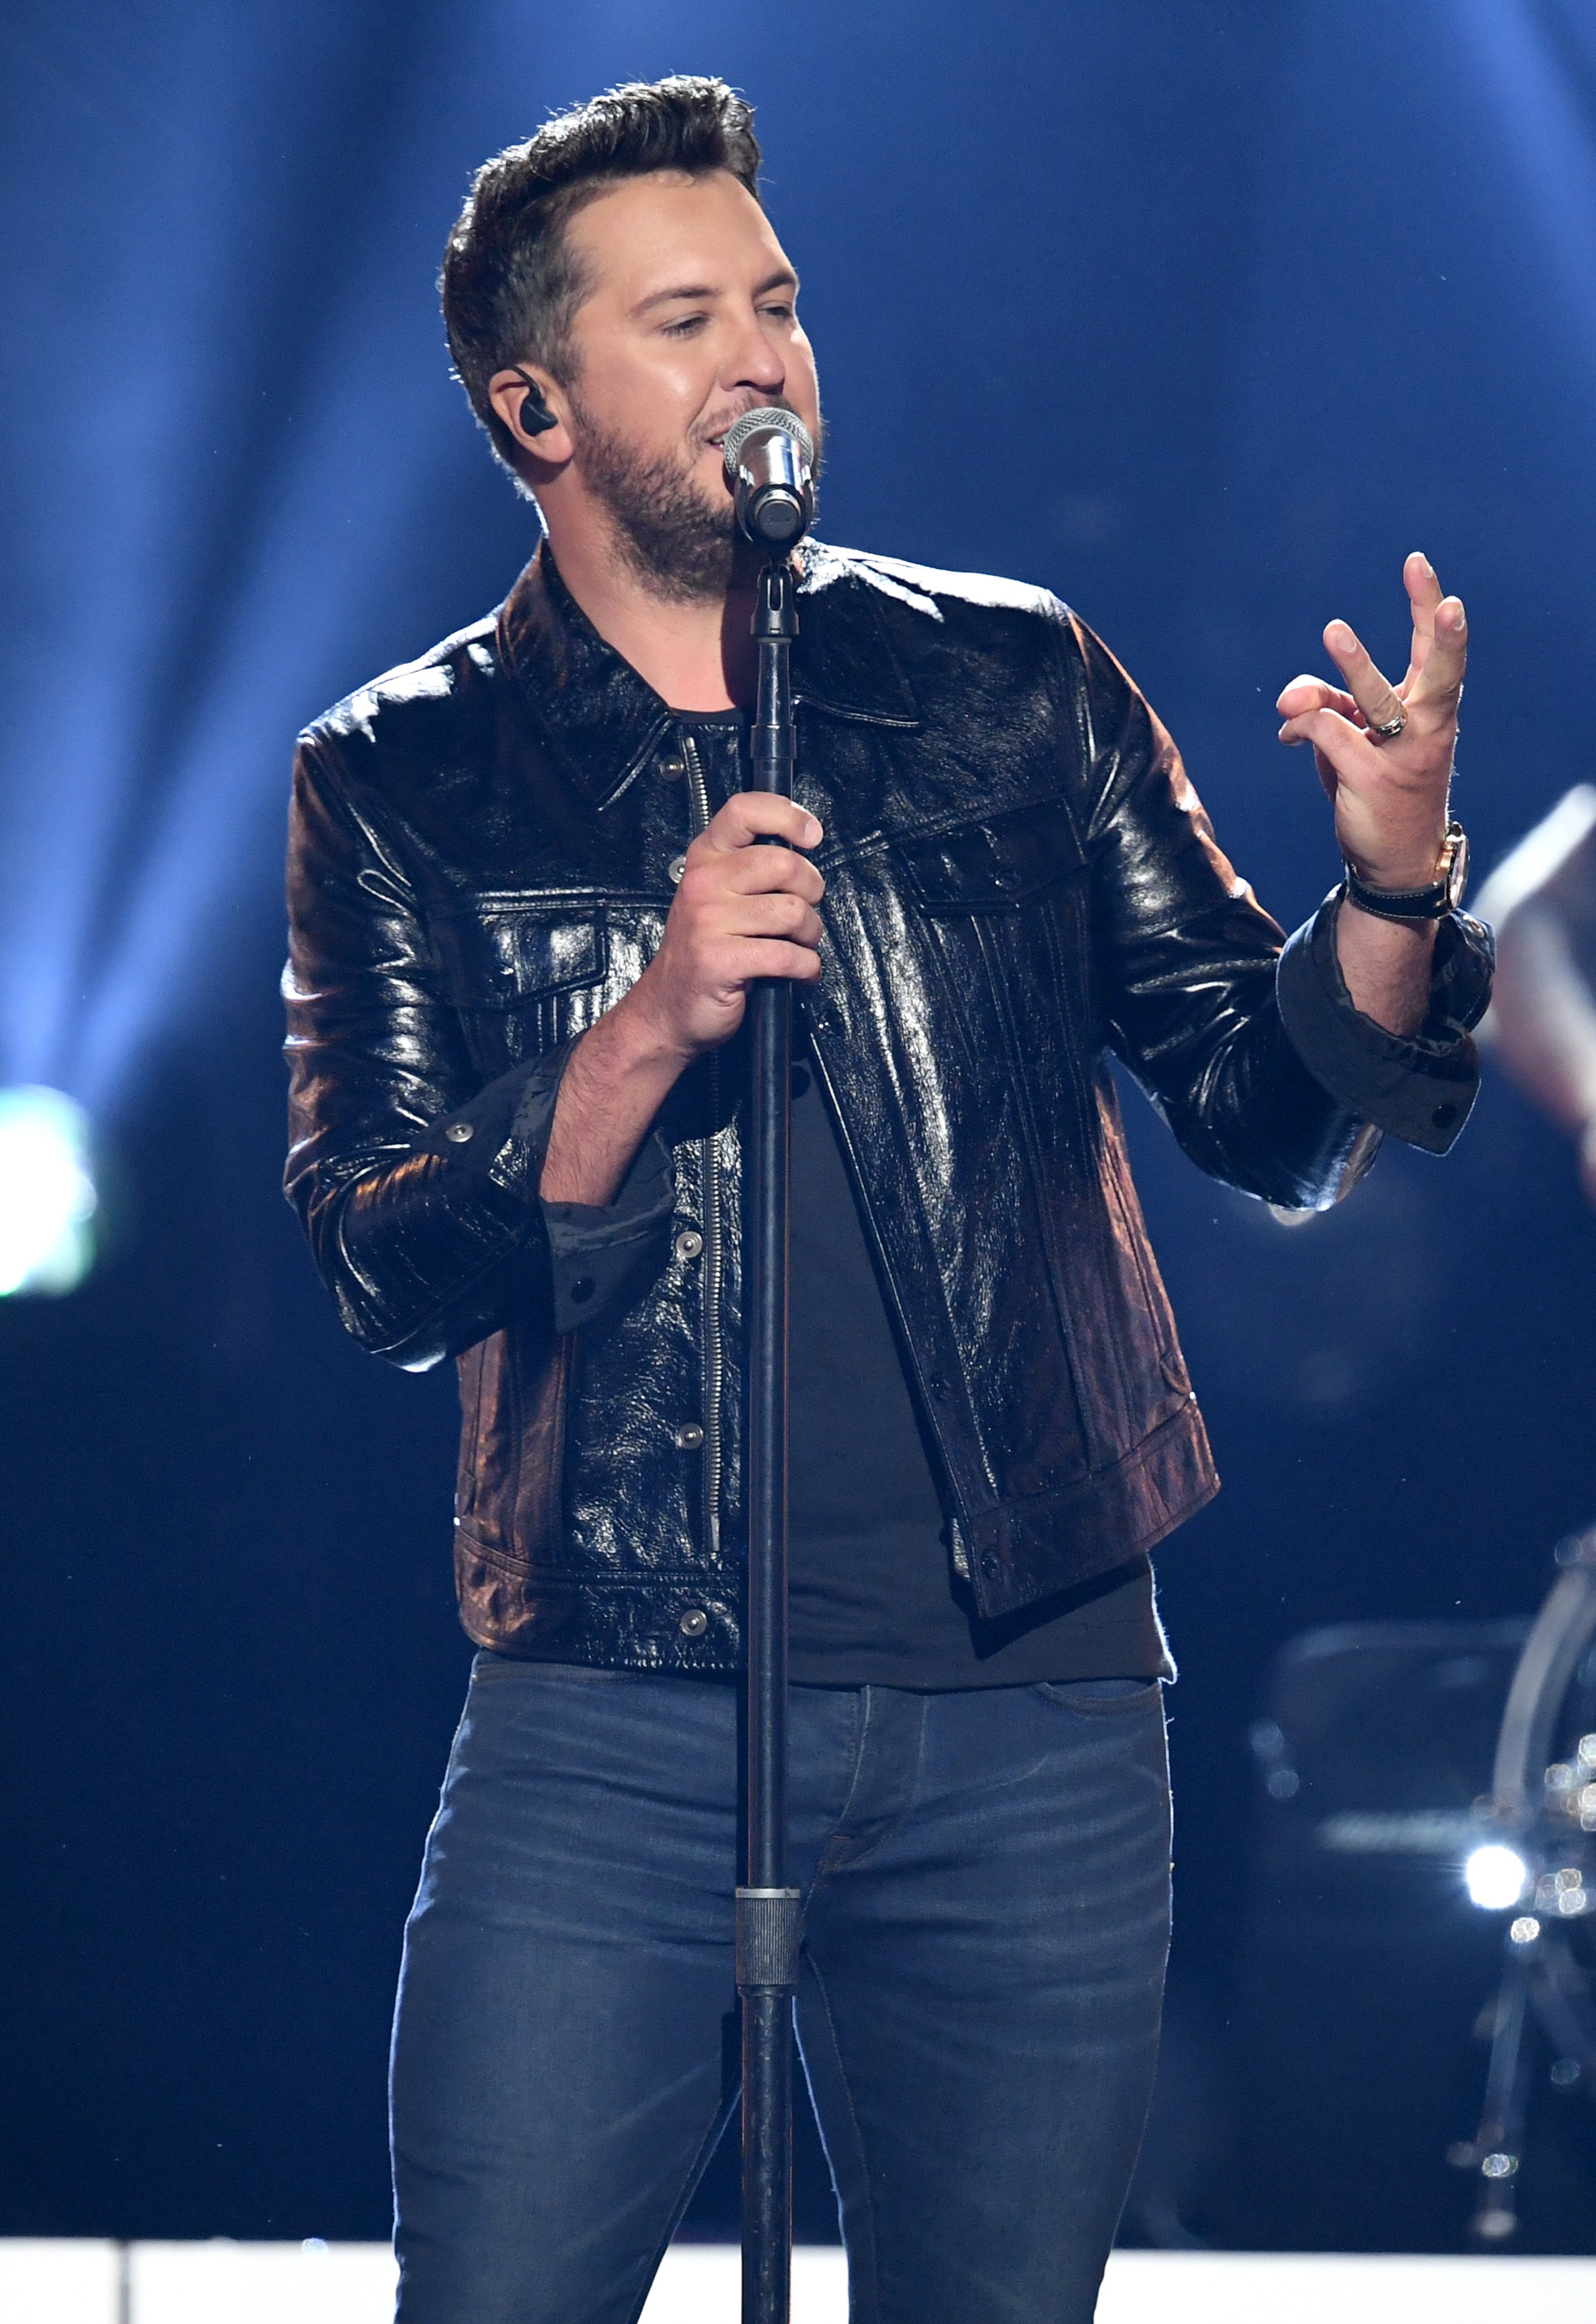 Luke Bryan, who just released his 7th album,"Born Here Die Here" shows energy while performing onstage. | Photo: Getty Images